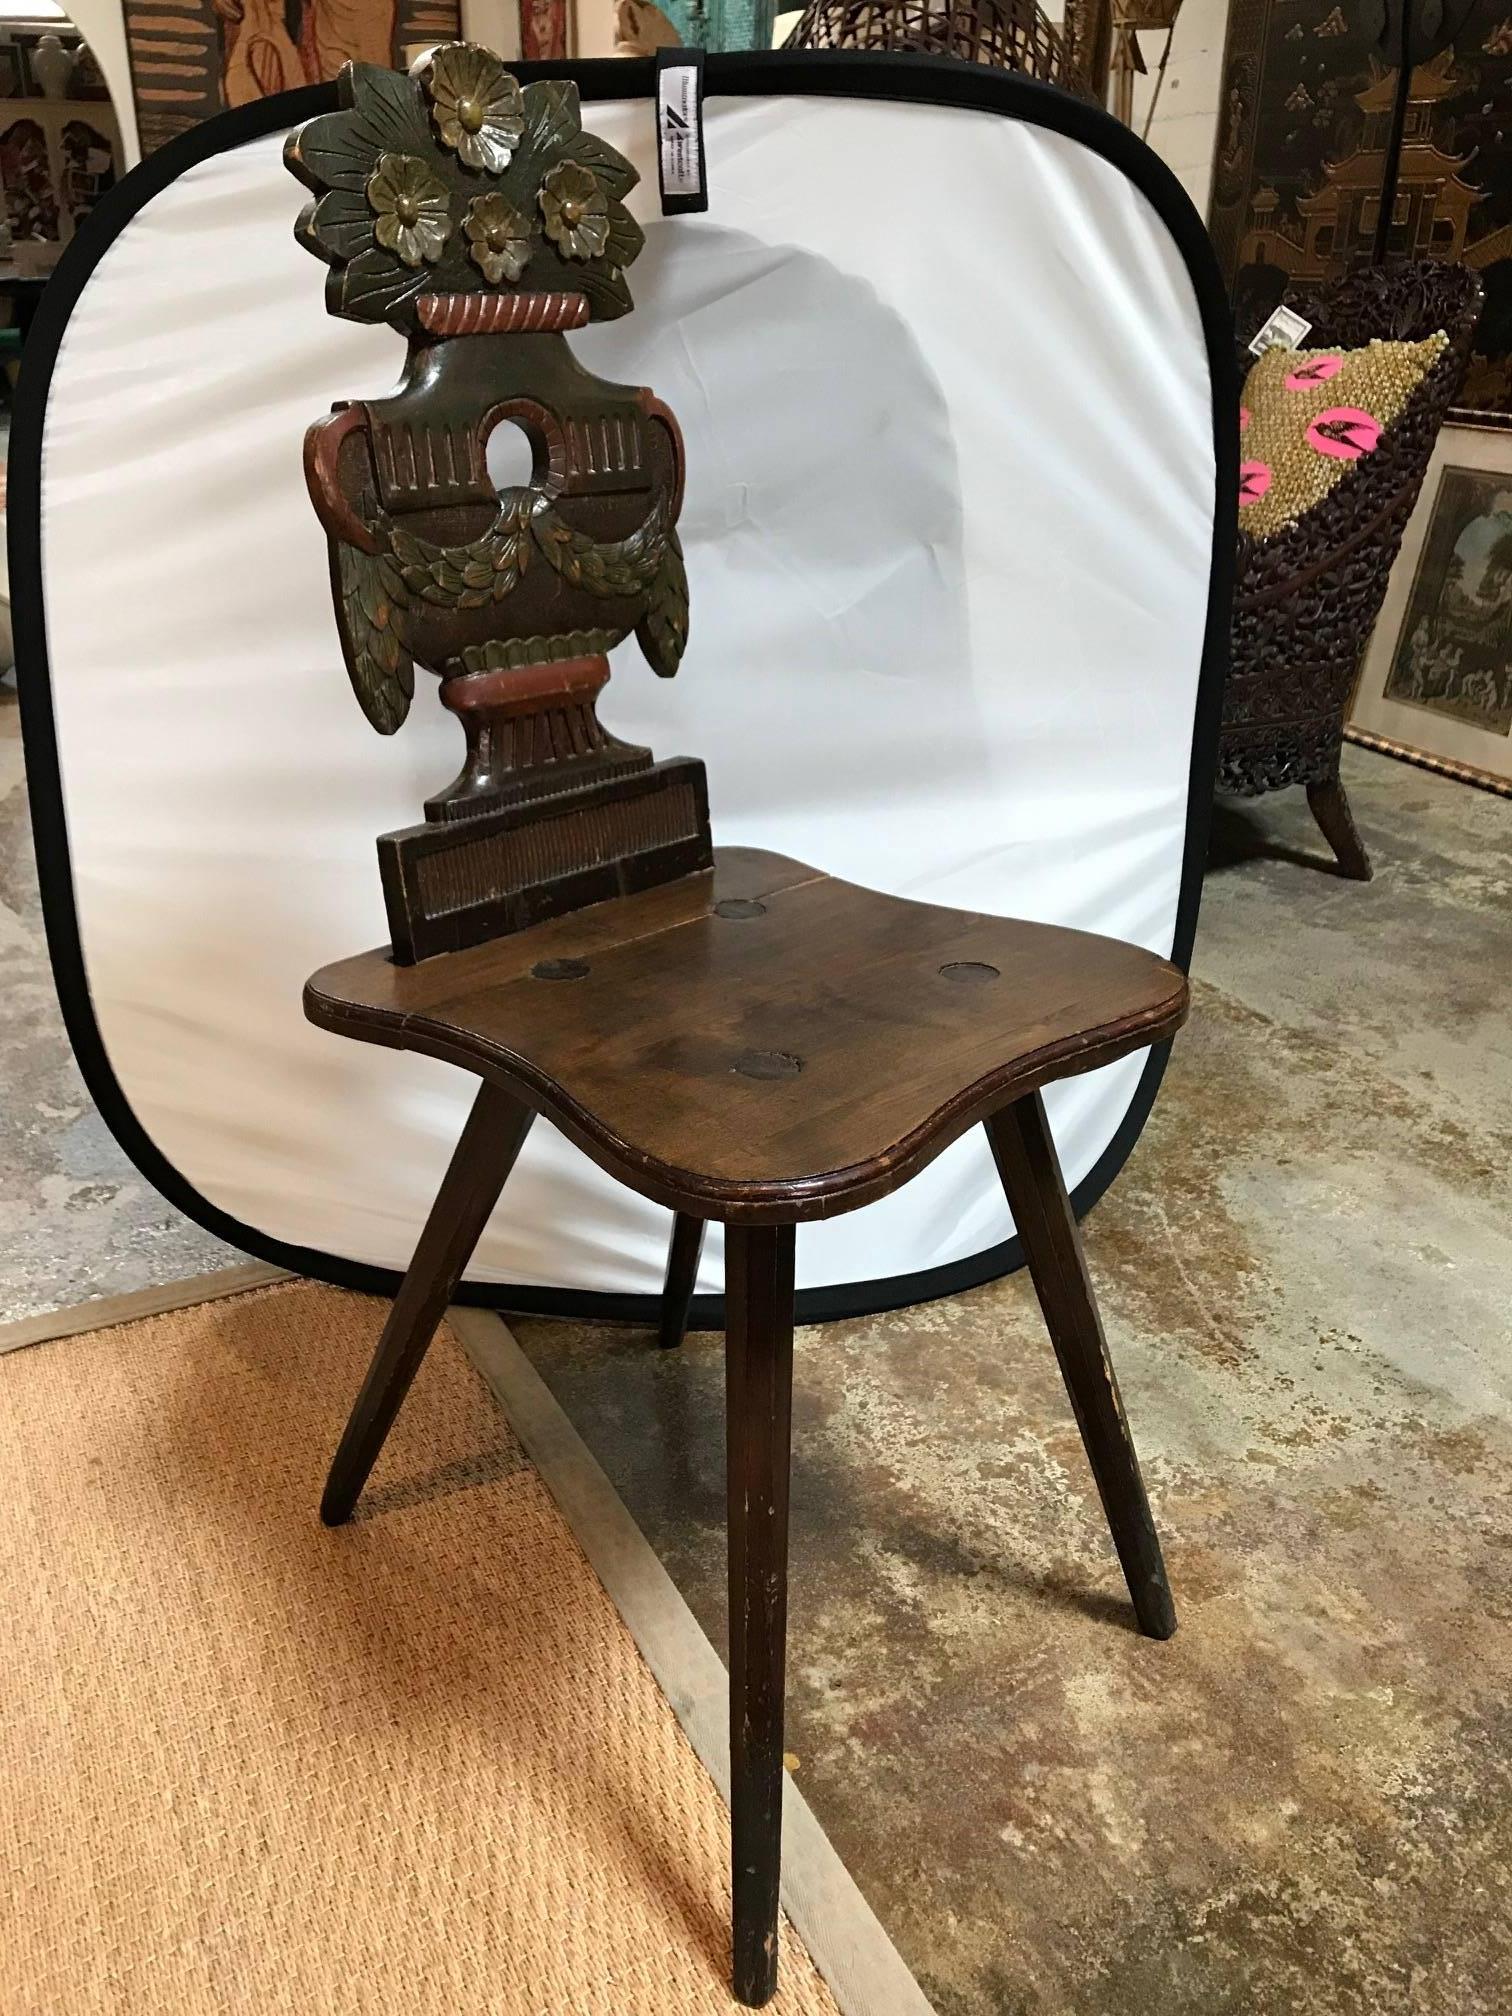 Side chair with antique joinery and old world carving

Three chairs available.

   